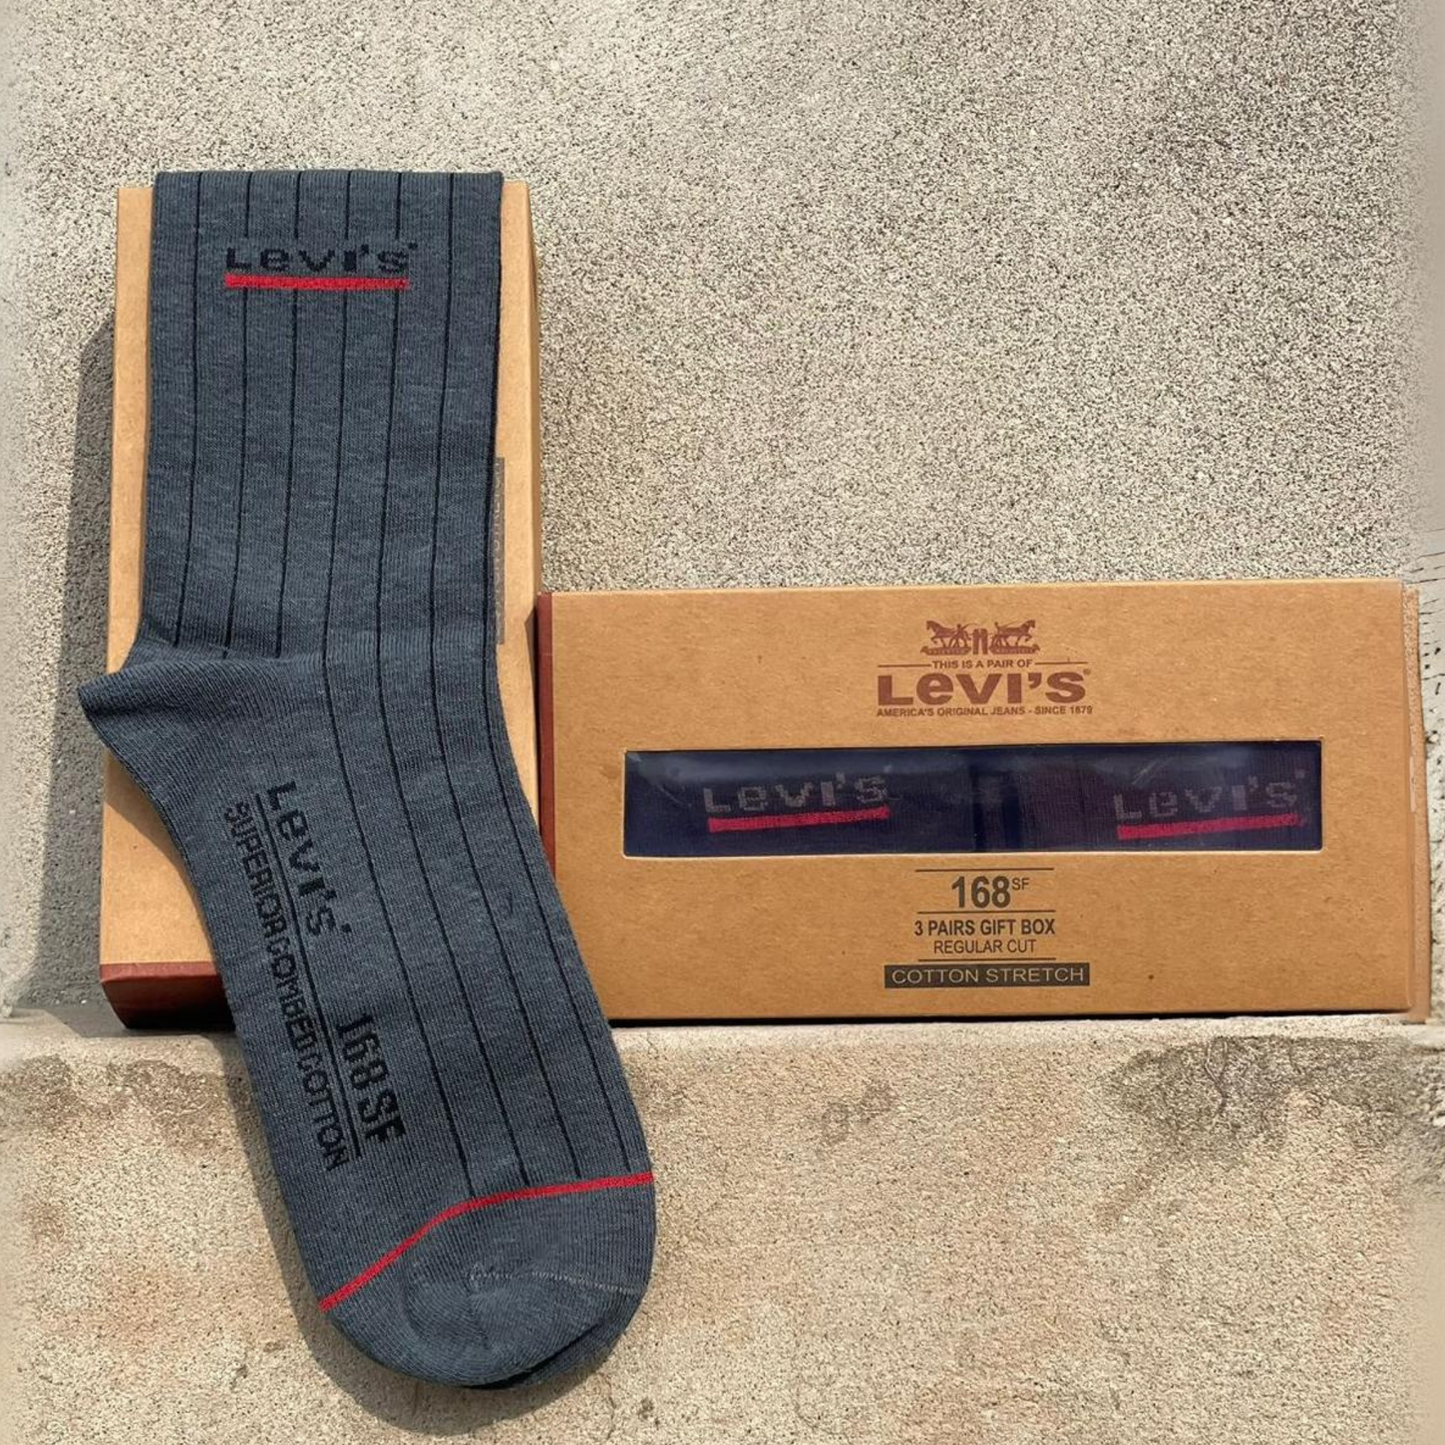 LEVIS Brand 3 Colors Socks for Men with Premium Gift Packing Export Quality